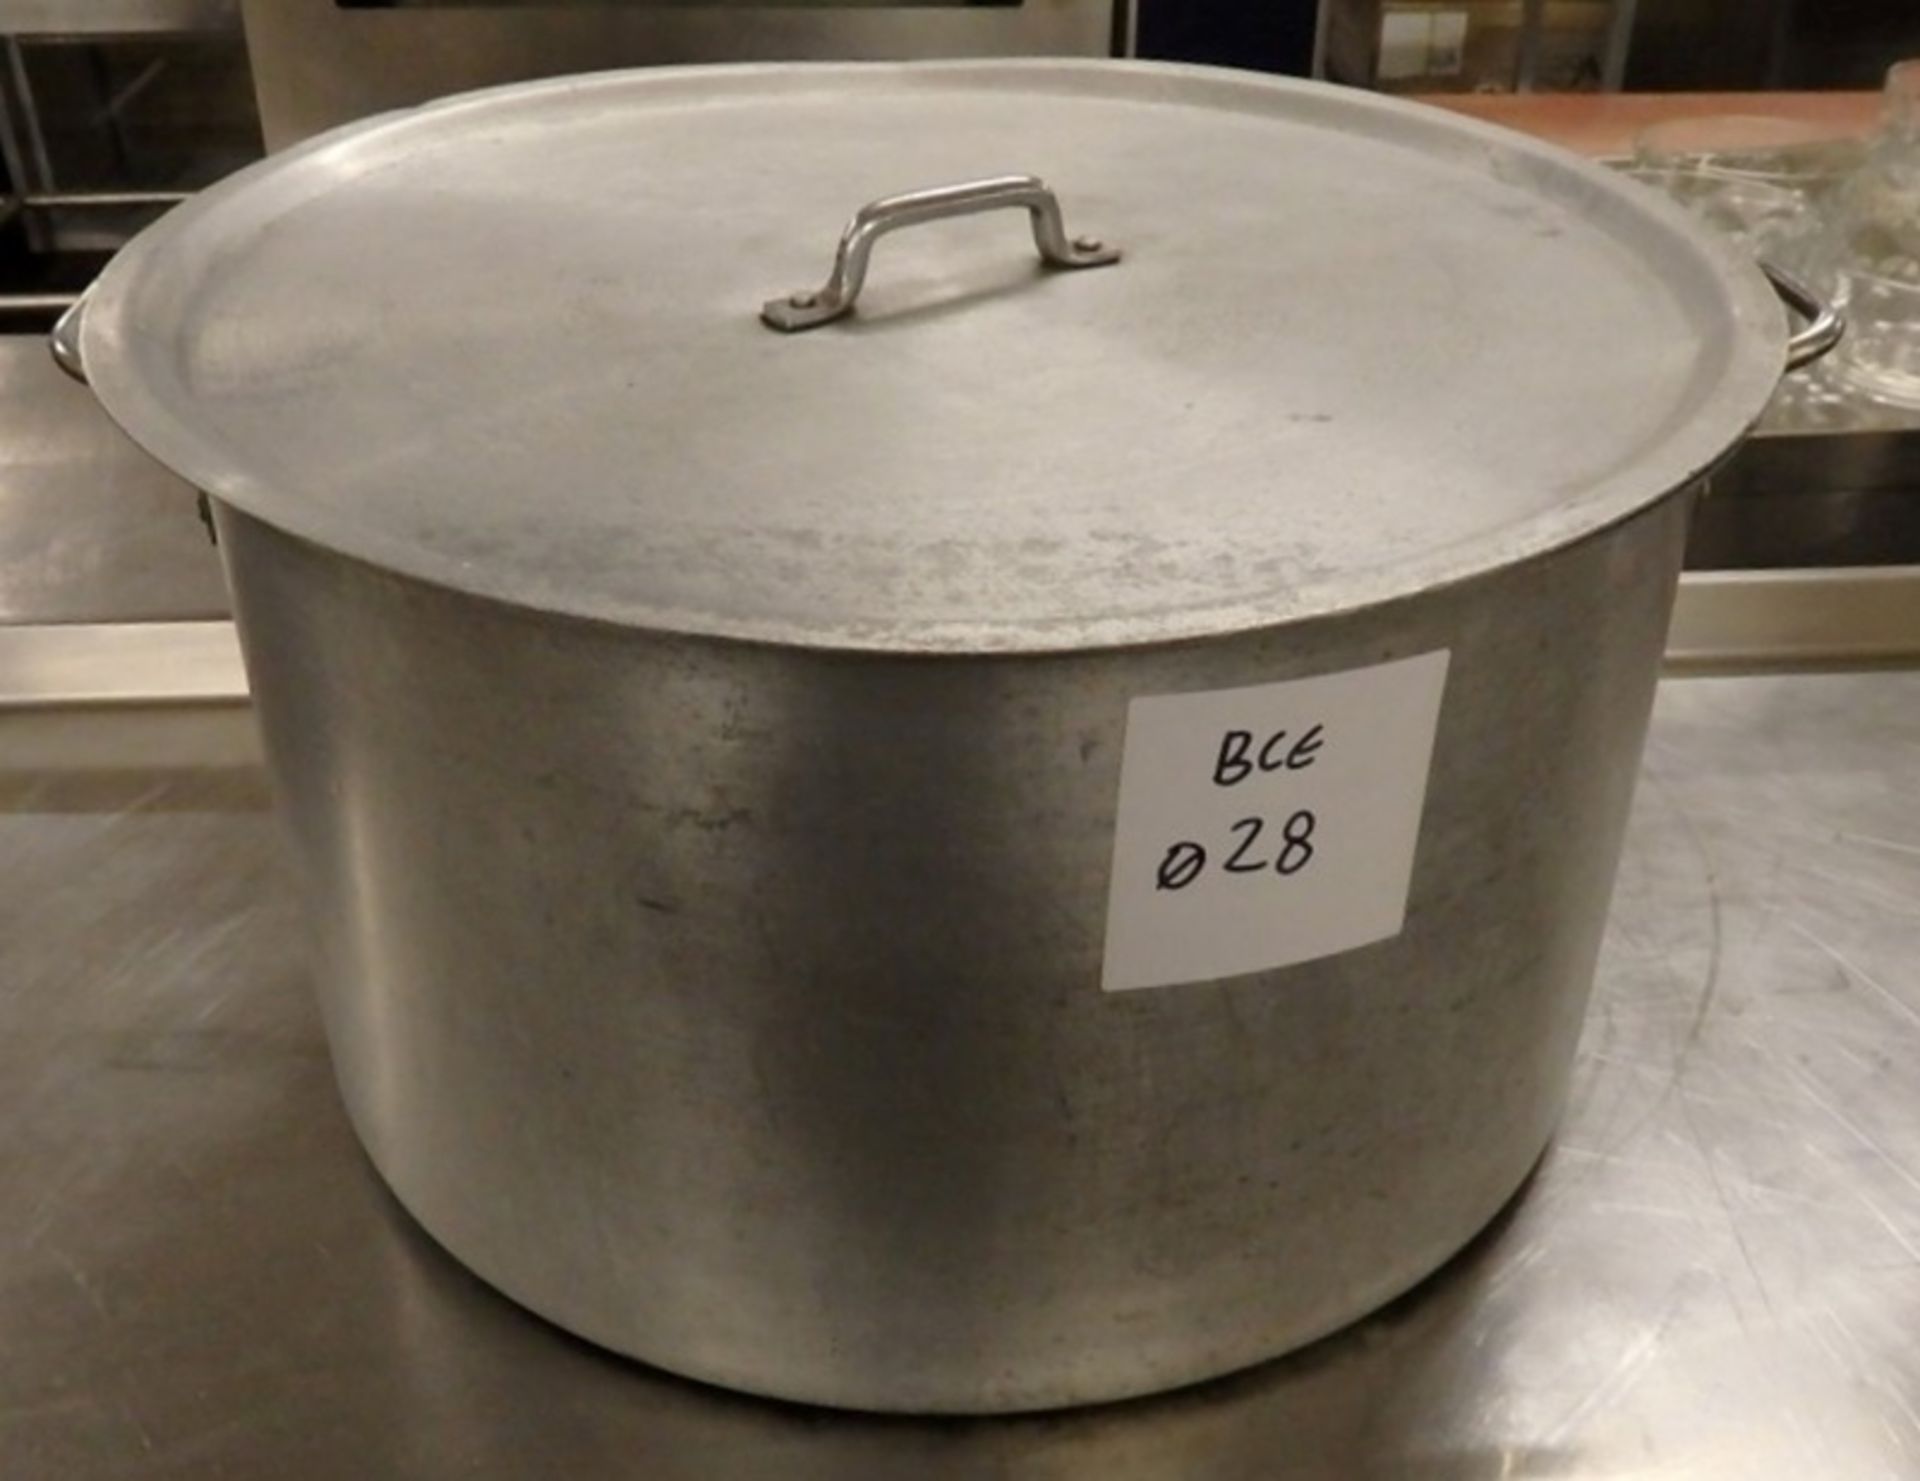 1 x Large Stainless Steel Cooking Pot With Lid - Dimensions: H34 x Diameter 57cm - Ref: BCE028 - - Image 2 of 5